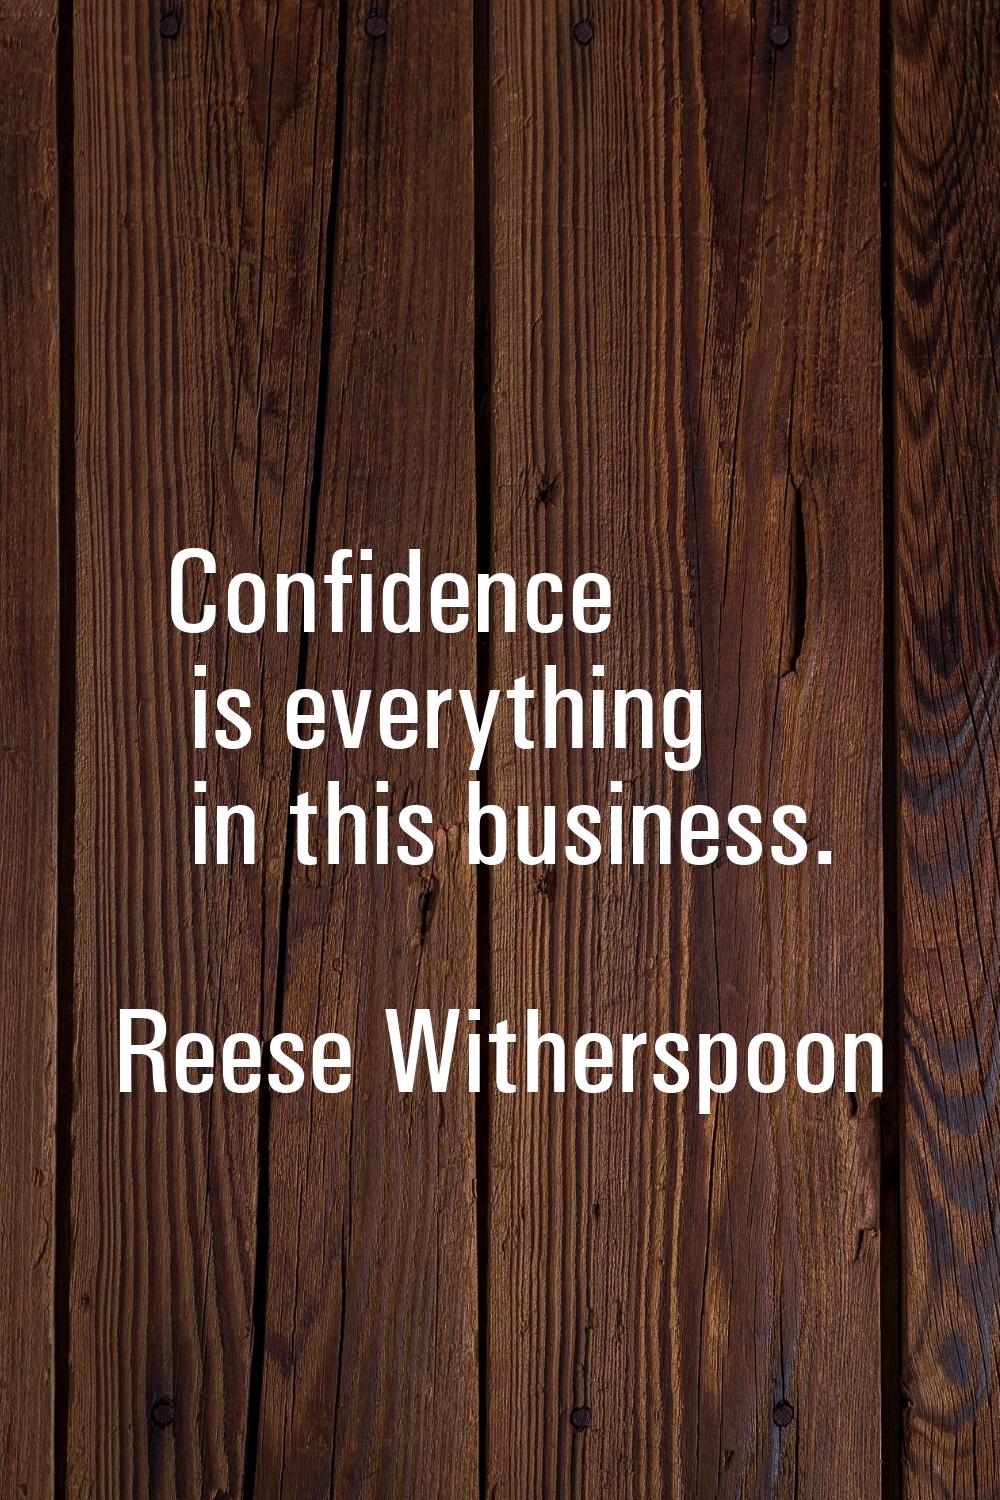 Confidence is everything in this business.